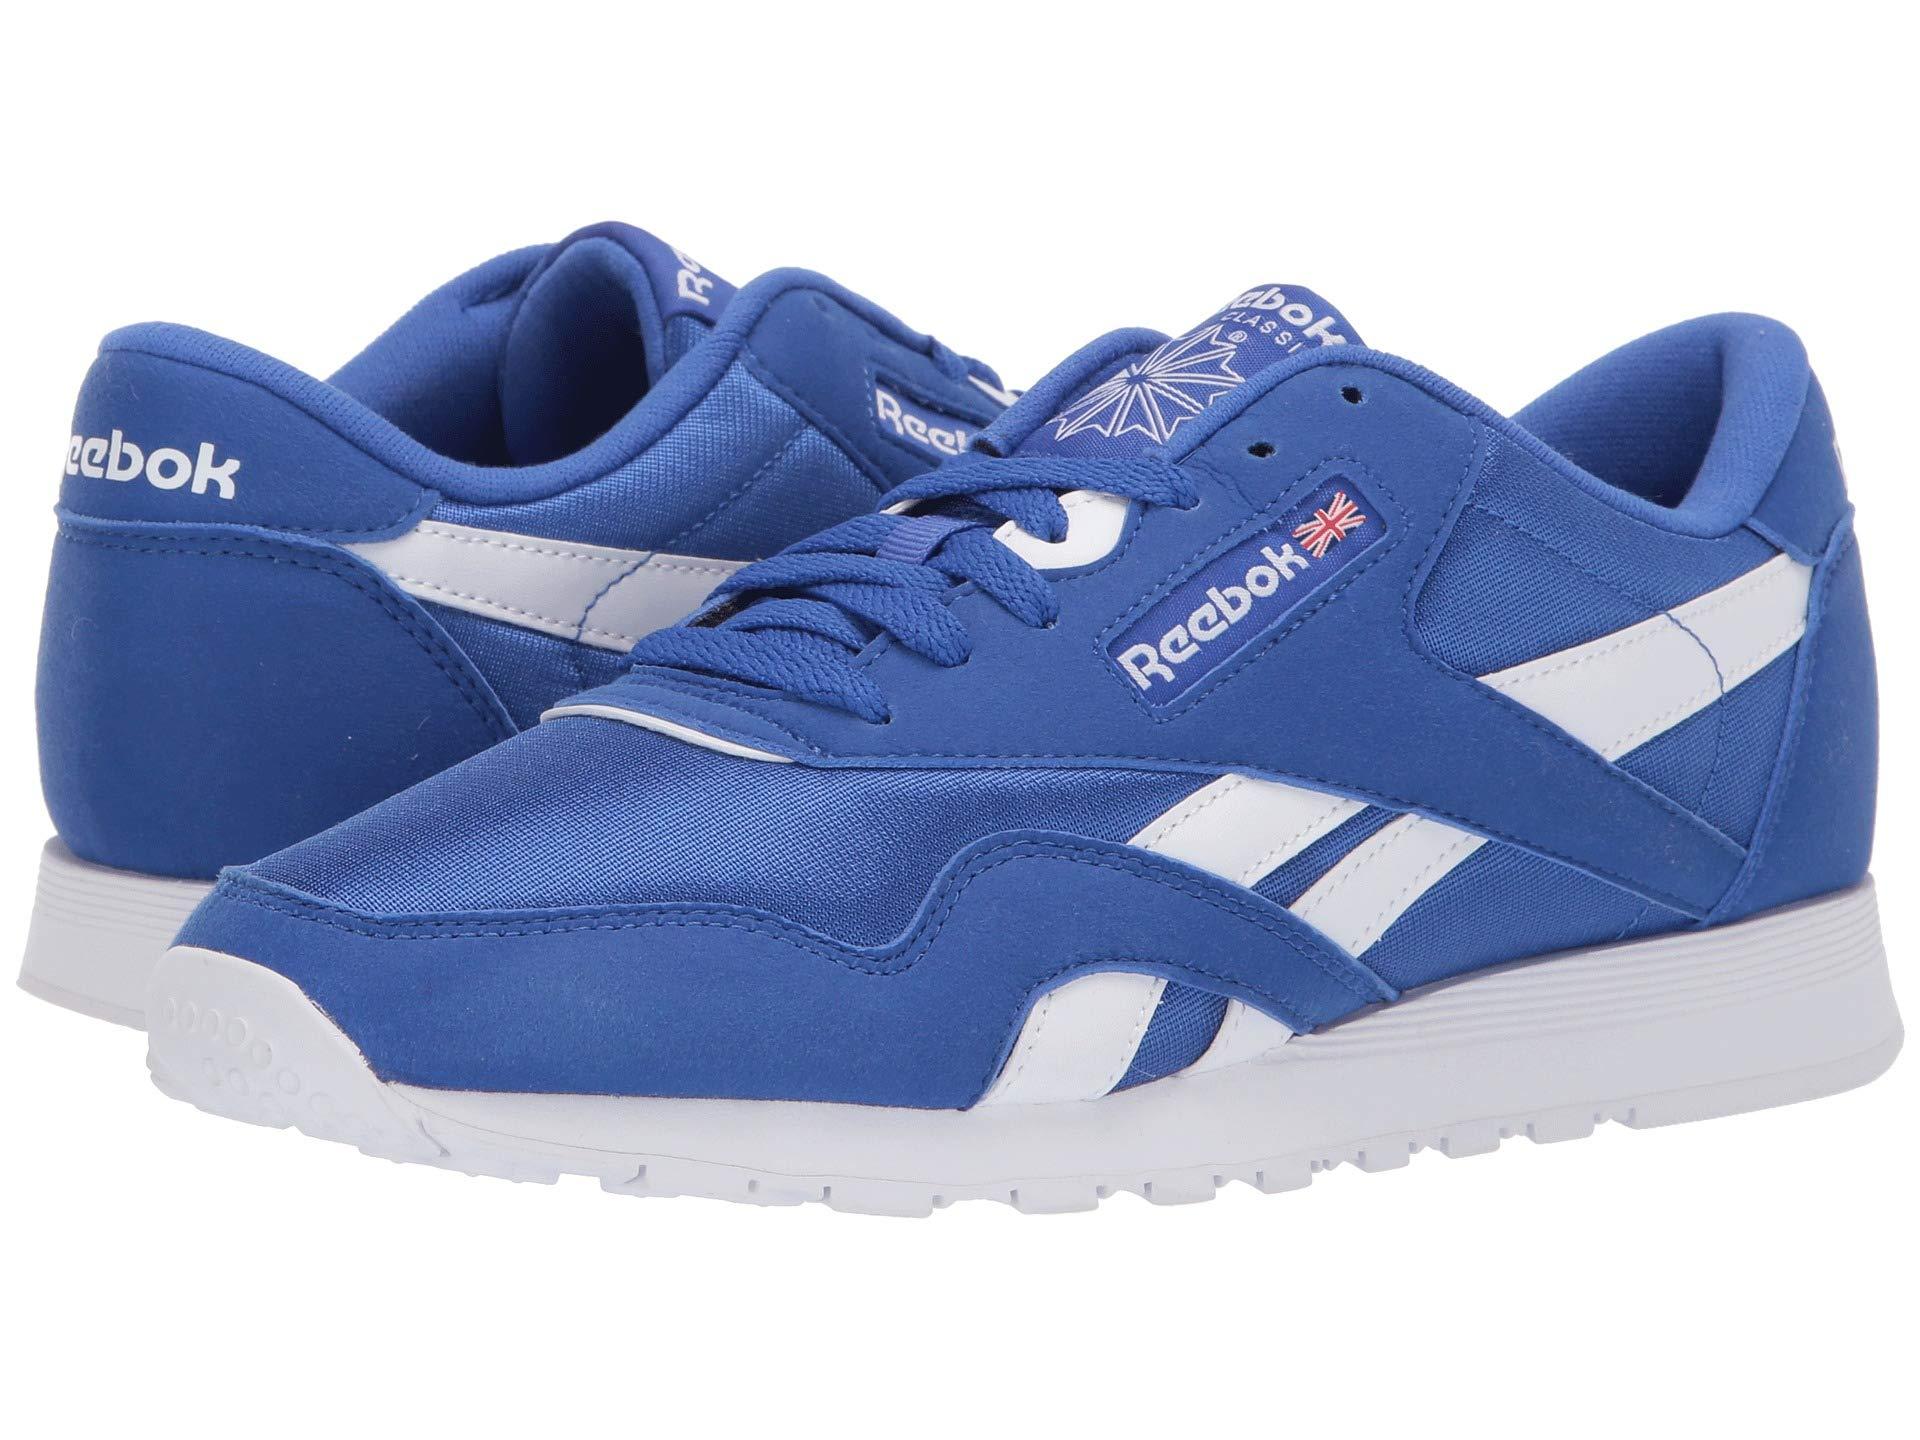 Reebok Synthetic Classic Nylon Color in Cobalt Blue (Blue) - Save 77% ...